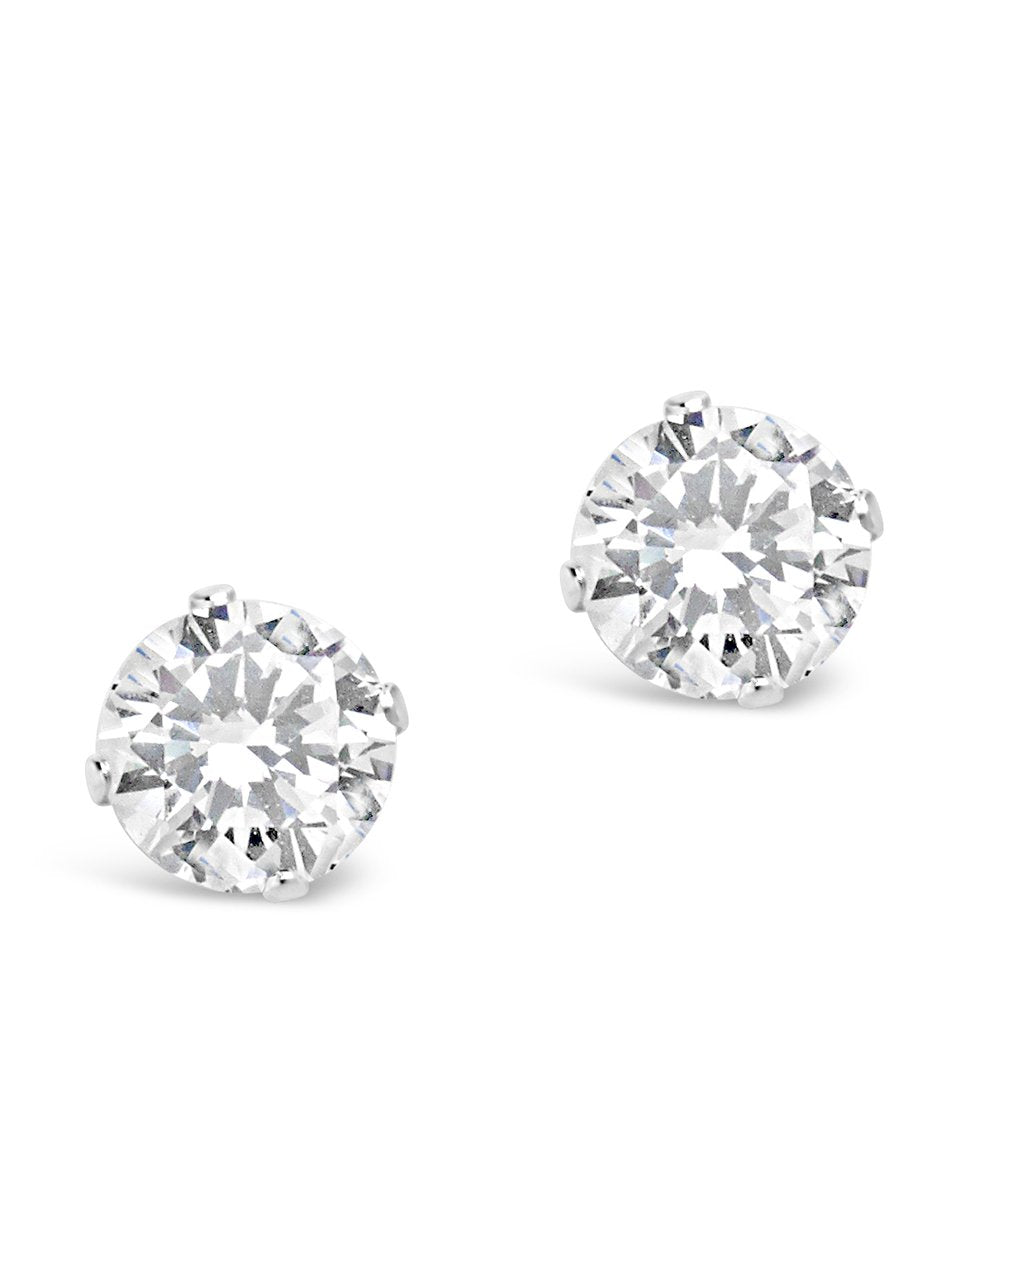 Women's Sterling Silver Stud Earrings Set With Round Cubic